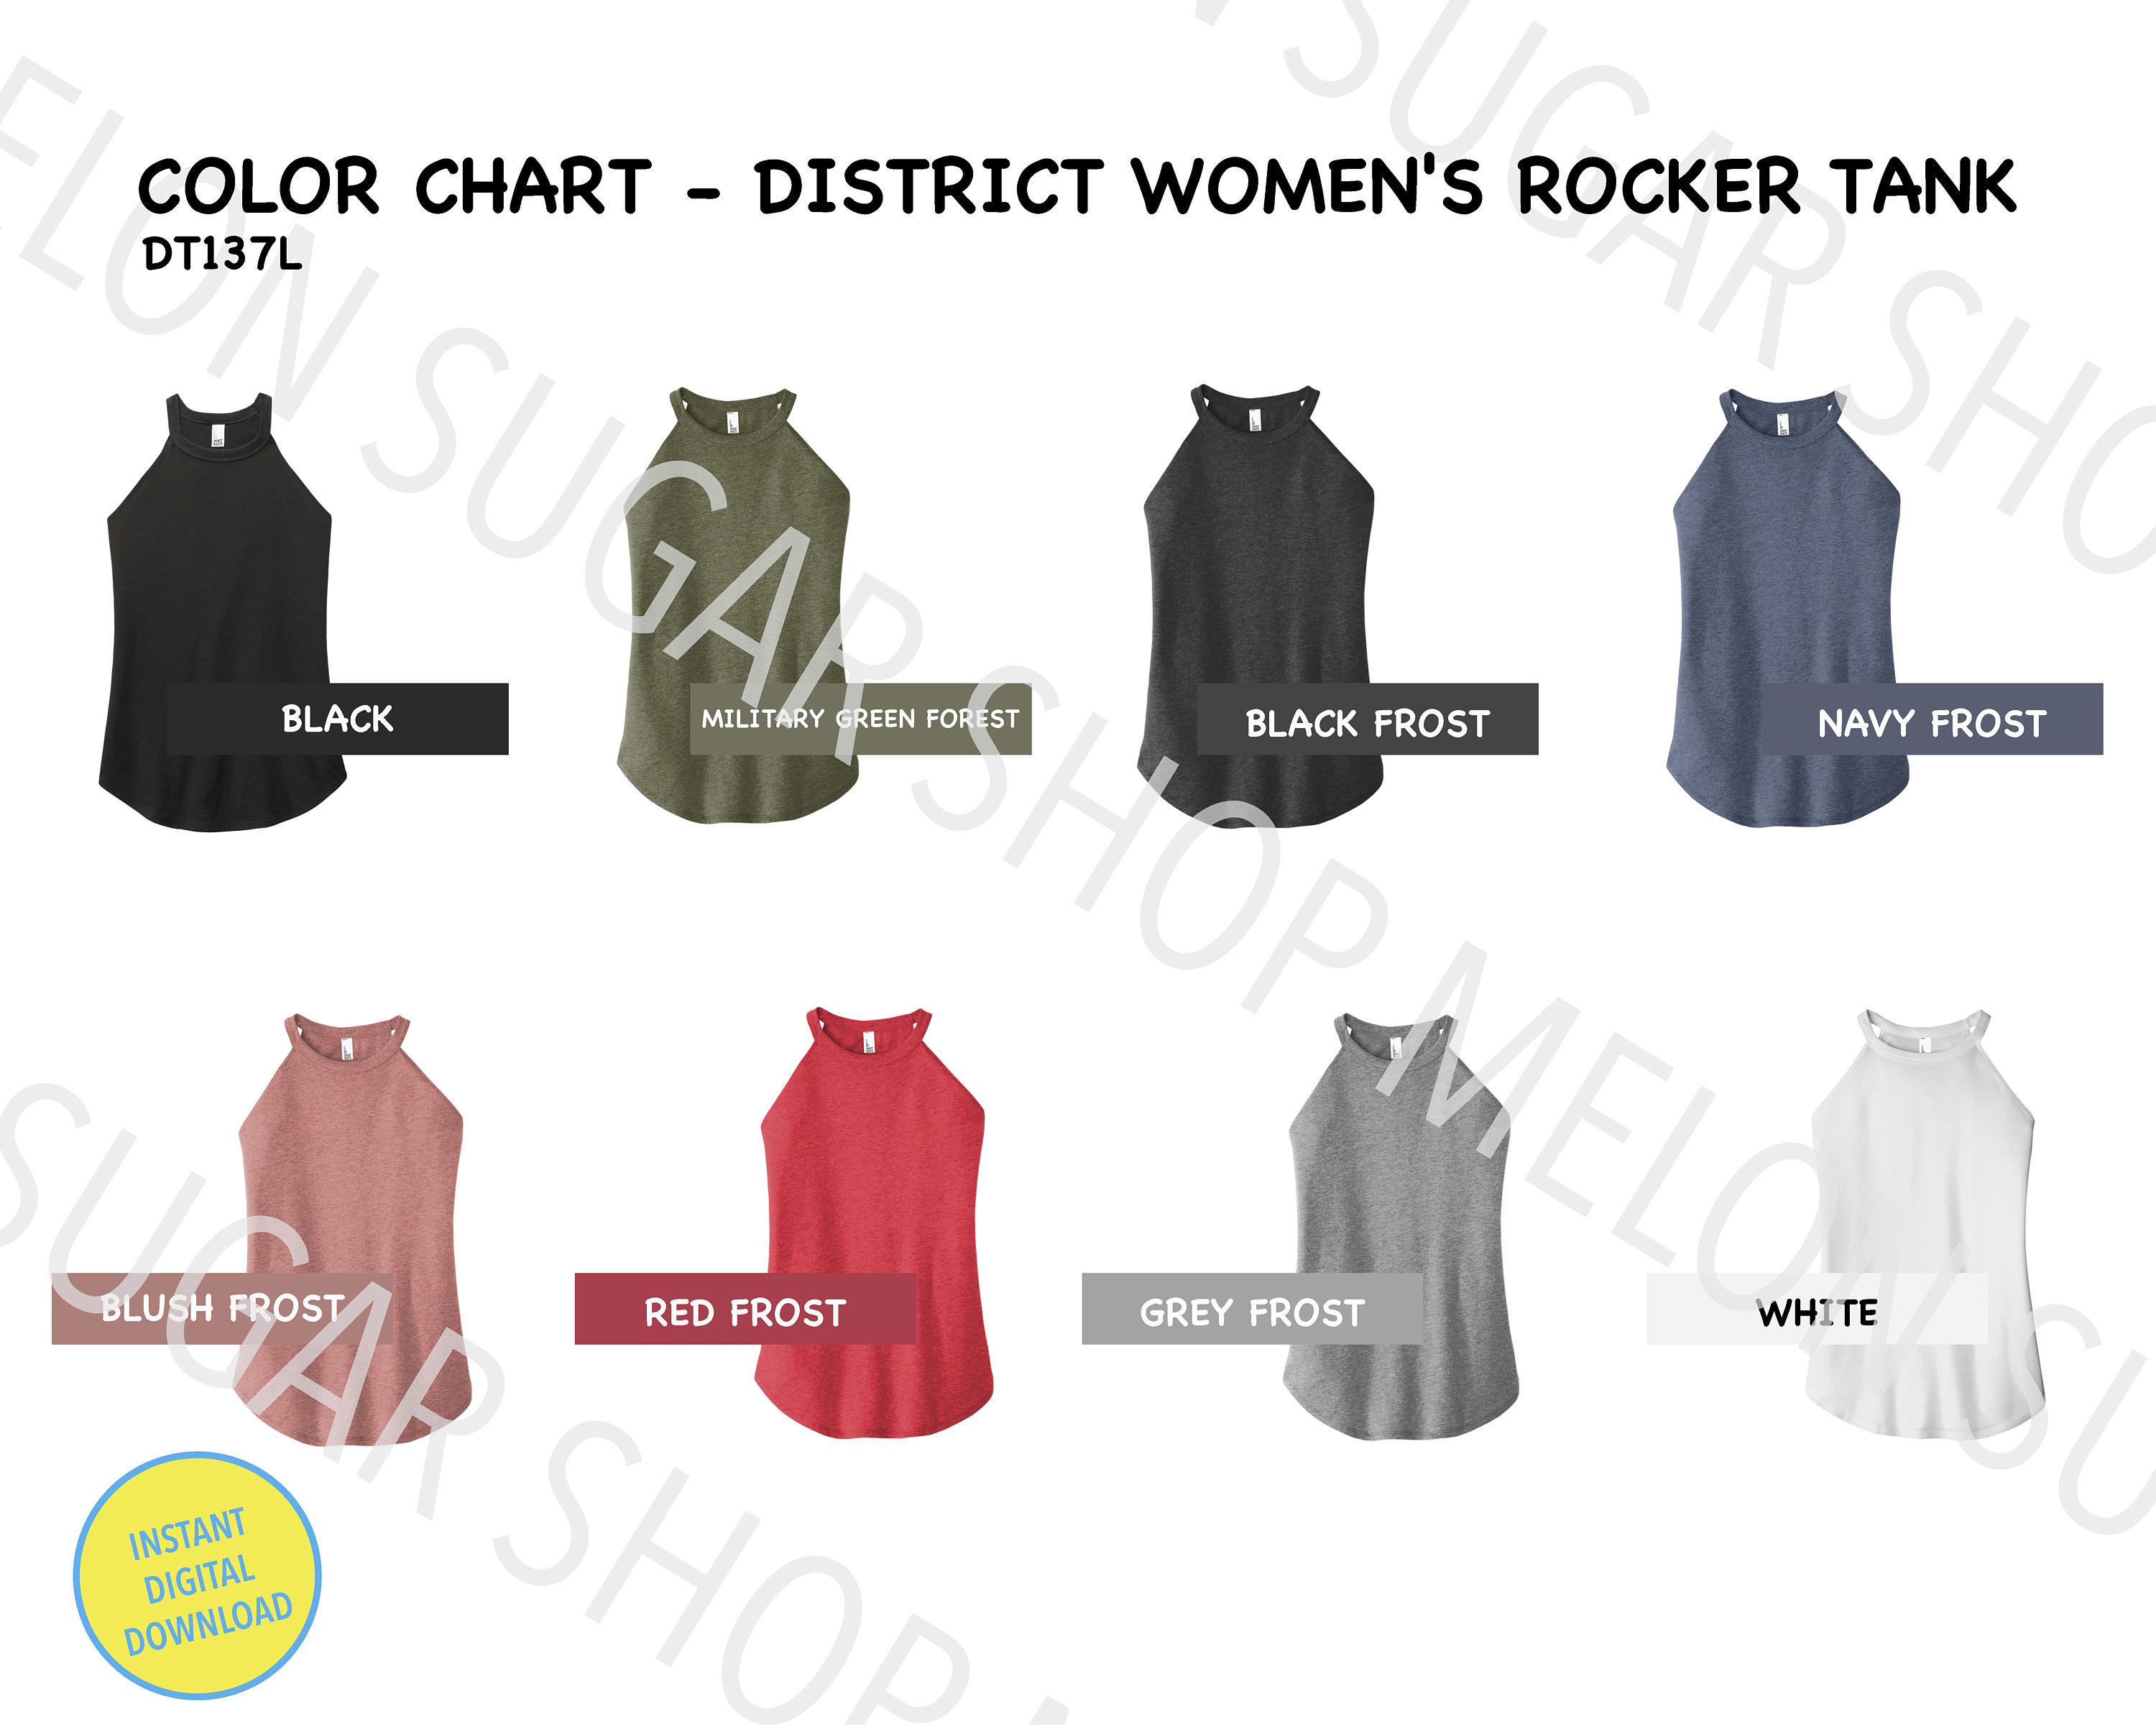 District Made DM138L Size Chart District Made Women's Perfect Tri